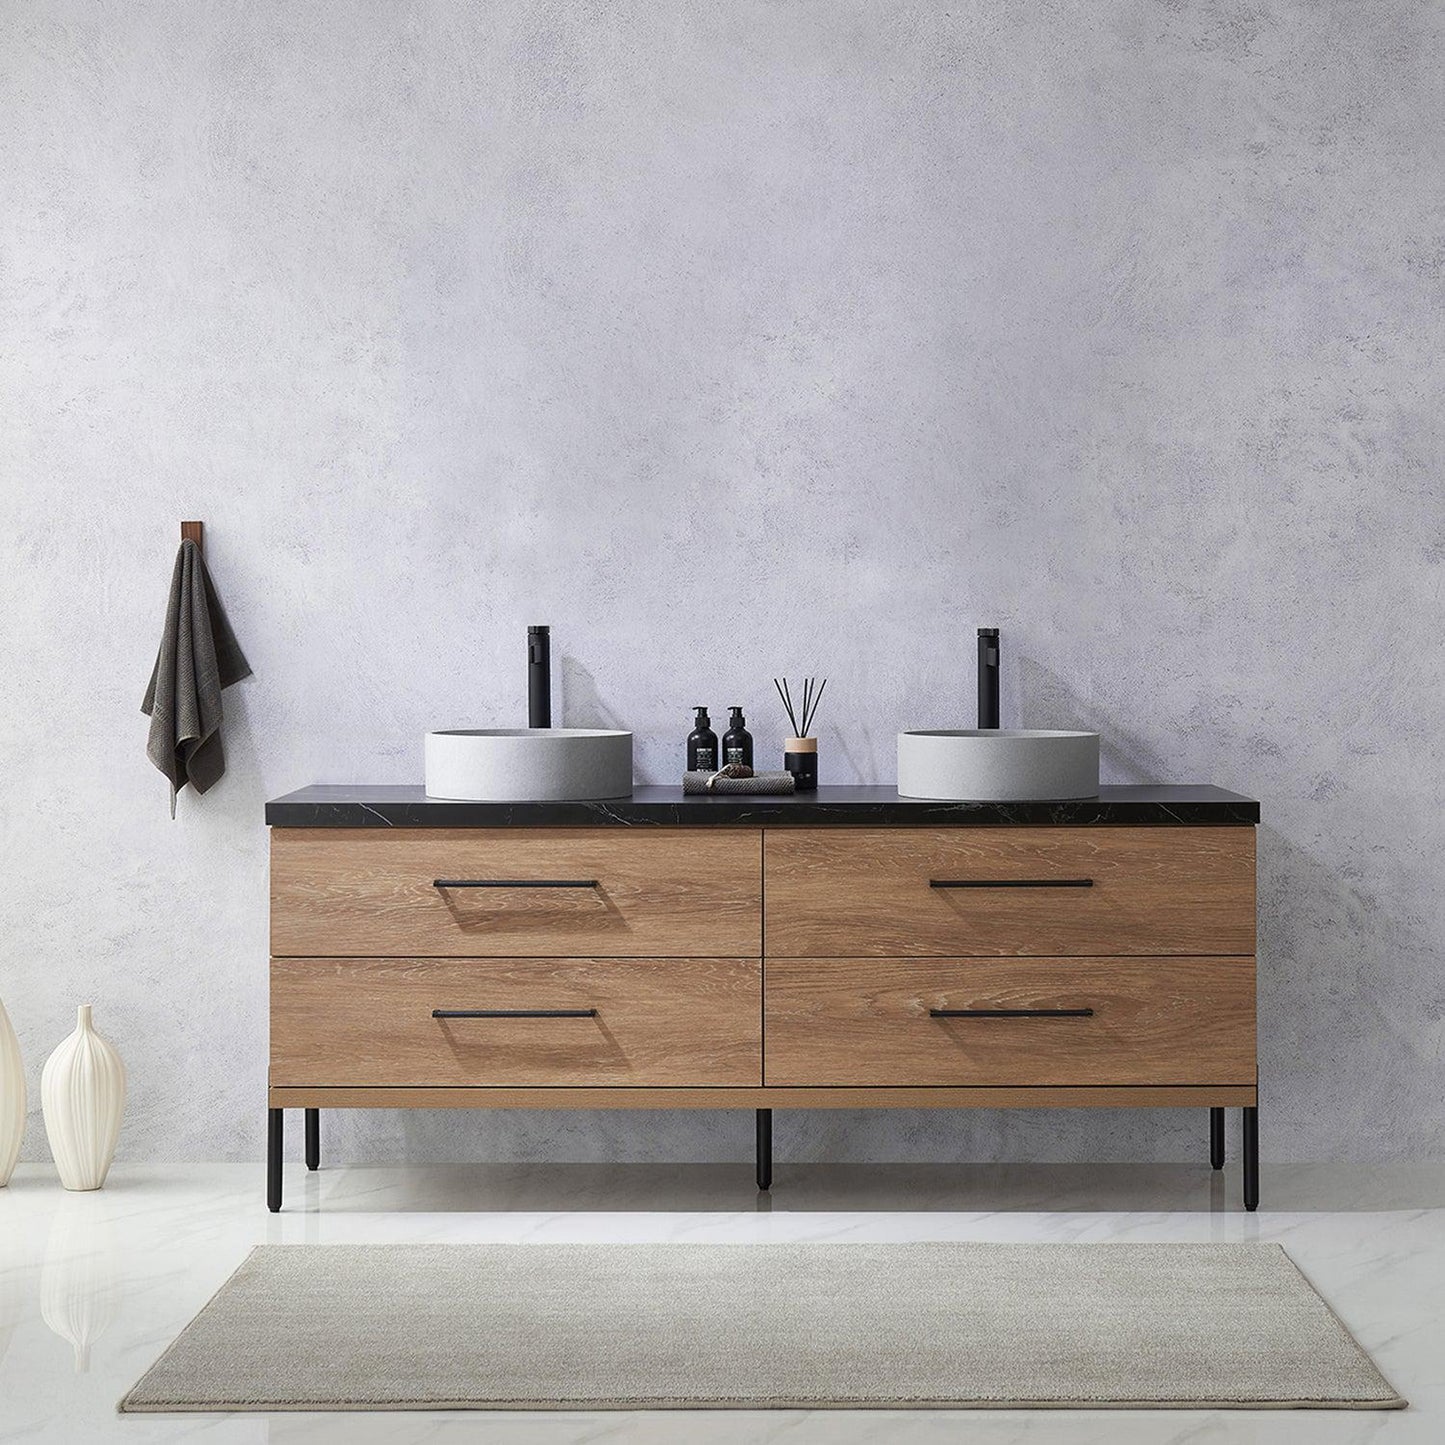 Vinnova Trento 72" Double Sink Bath Vanity In North American Oak With Black Sintered Stone Top With Circular Concrete Sink